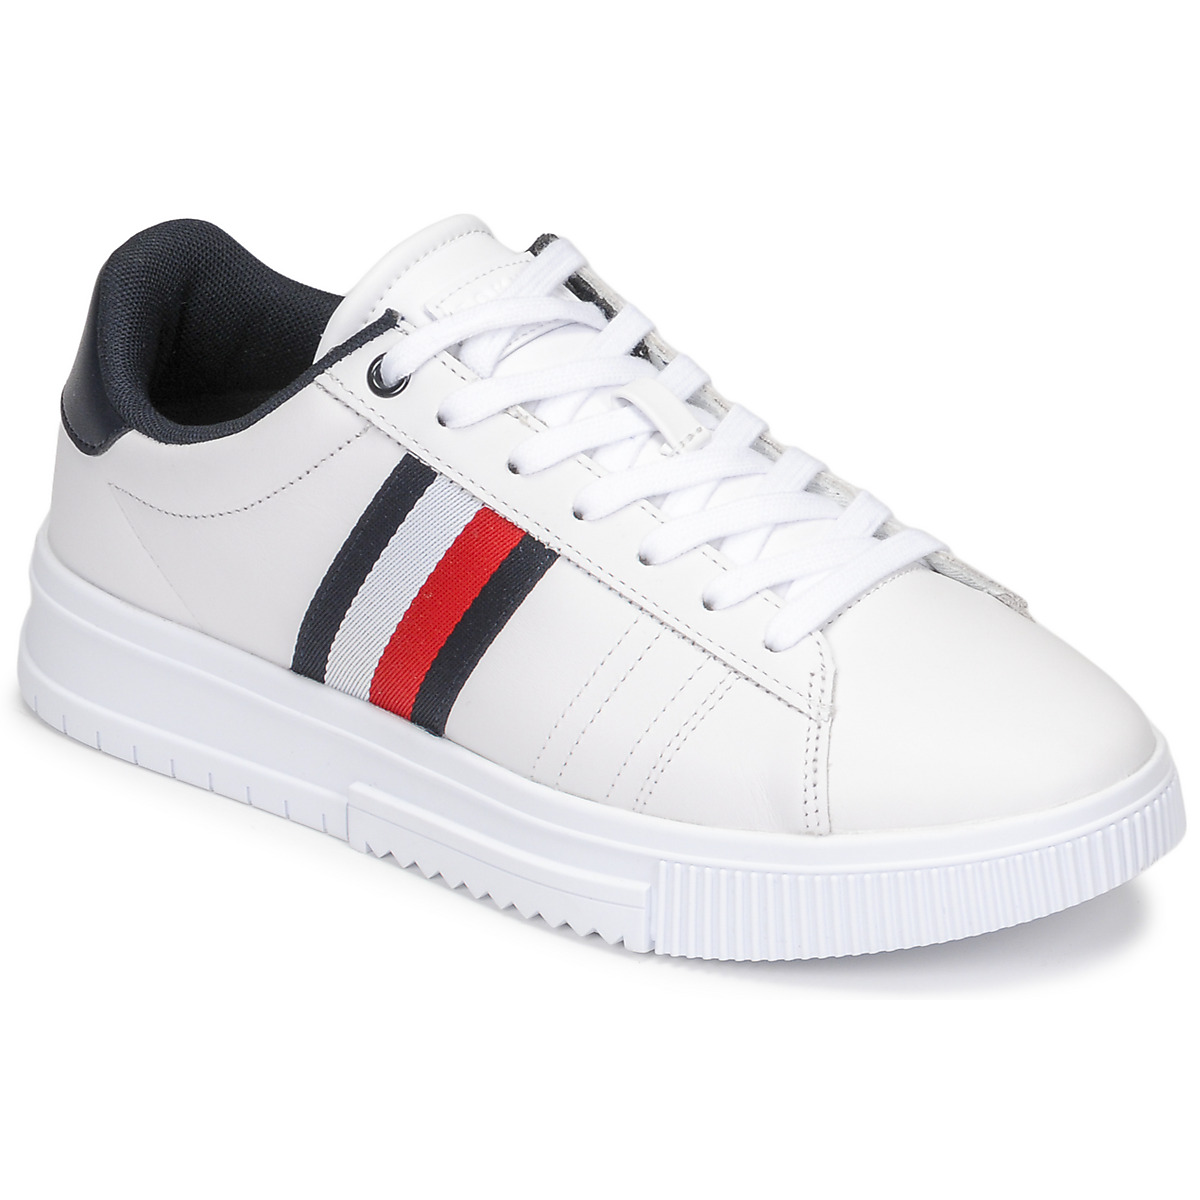 Tommy Hilfiger Supercup Leather White